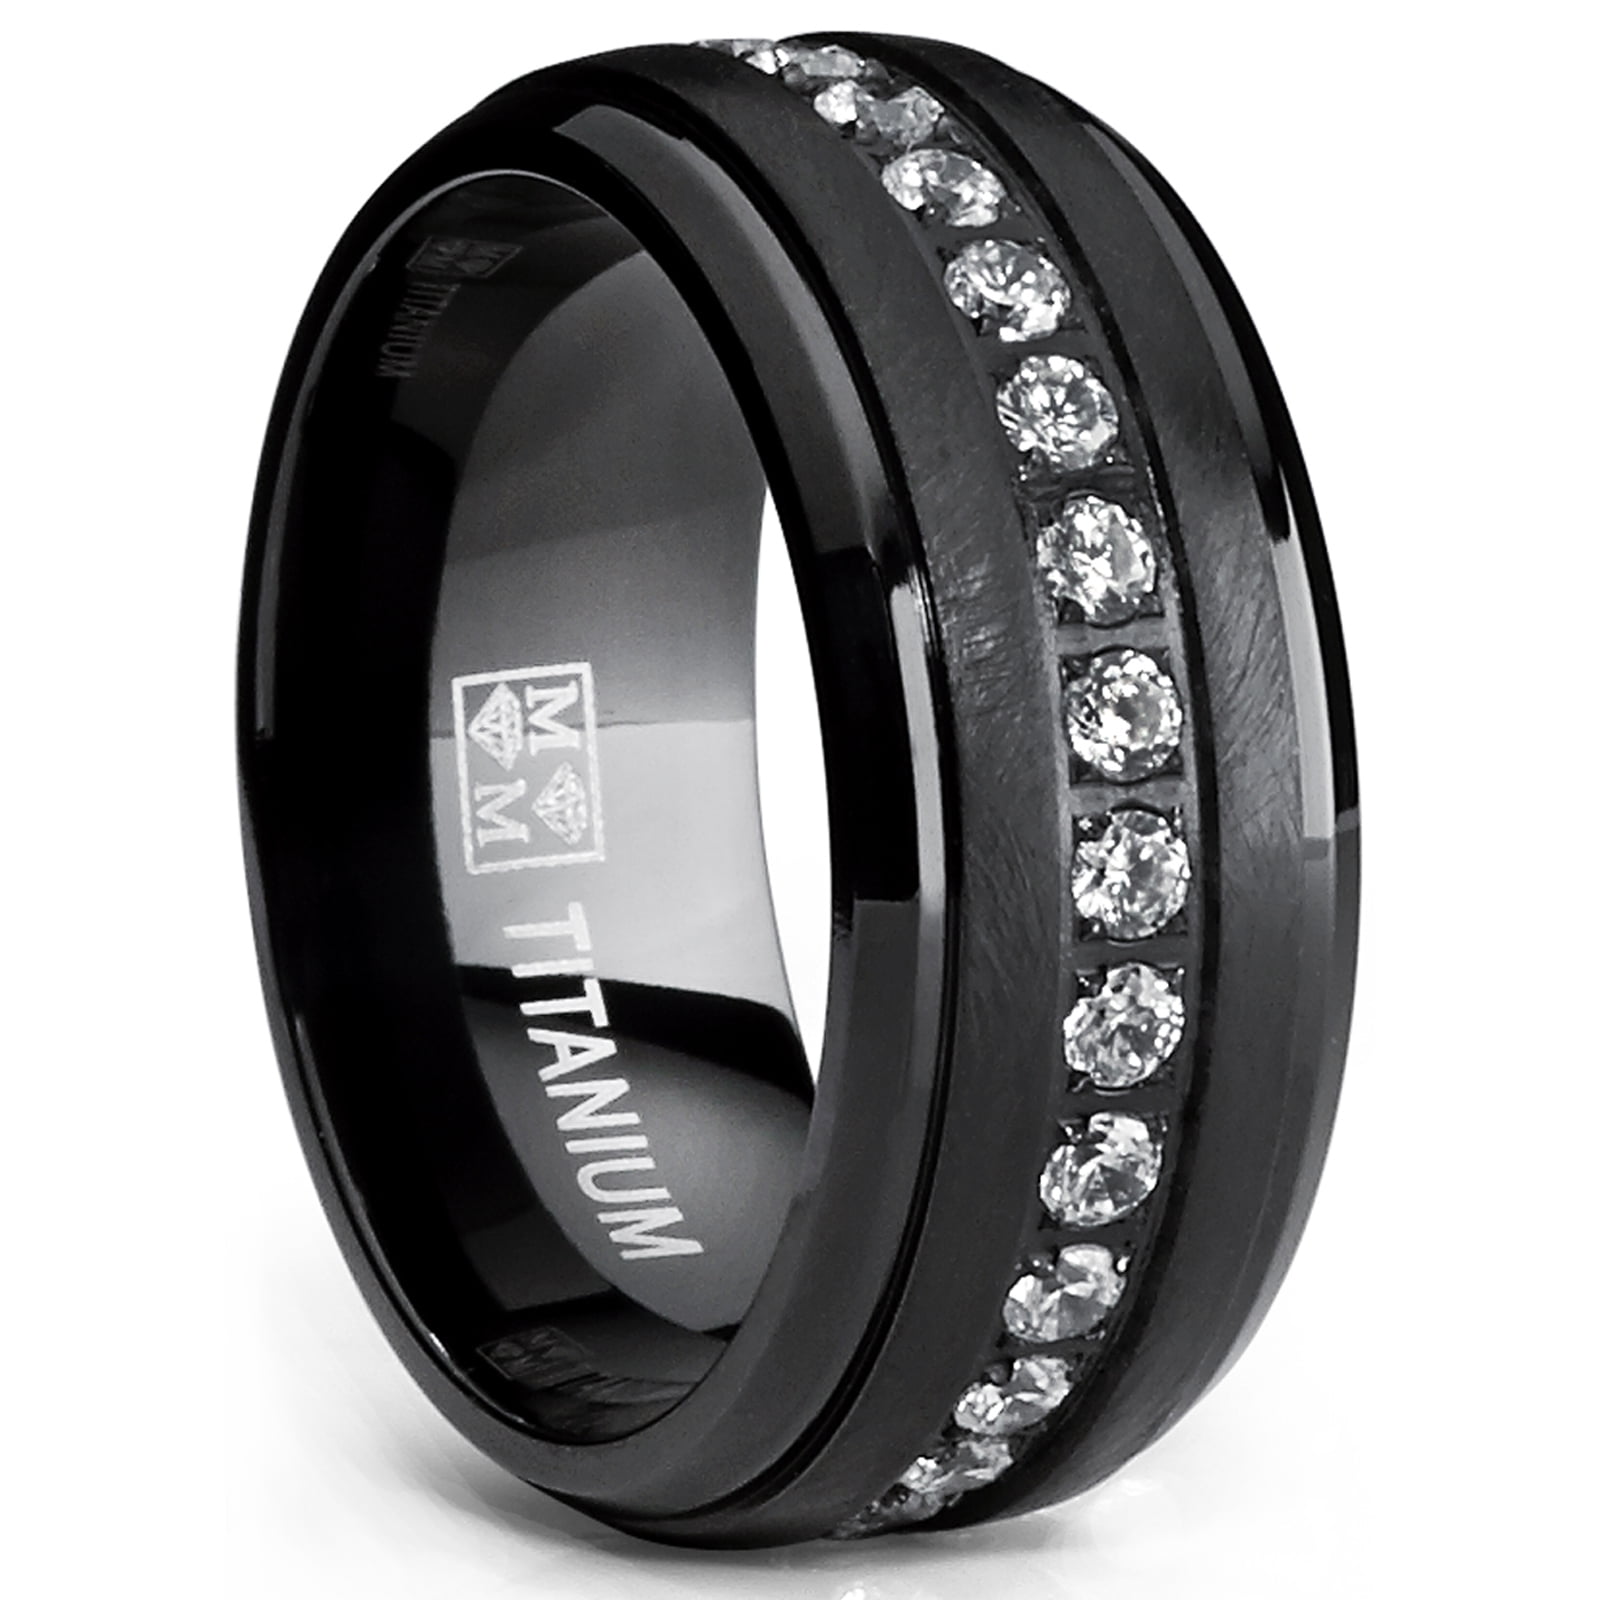 TITANIUM Black Plated RING BAND with Gold Plated Engraved Accent size 13! 